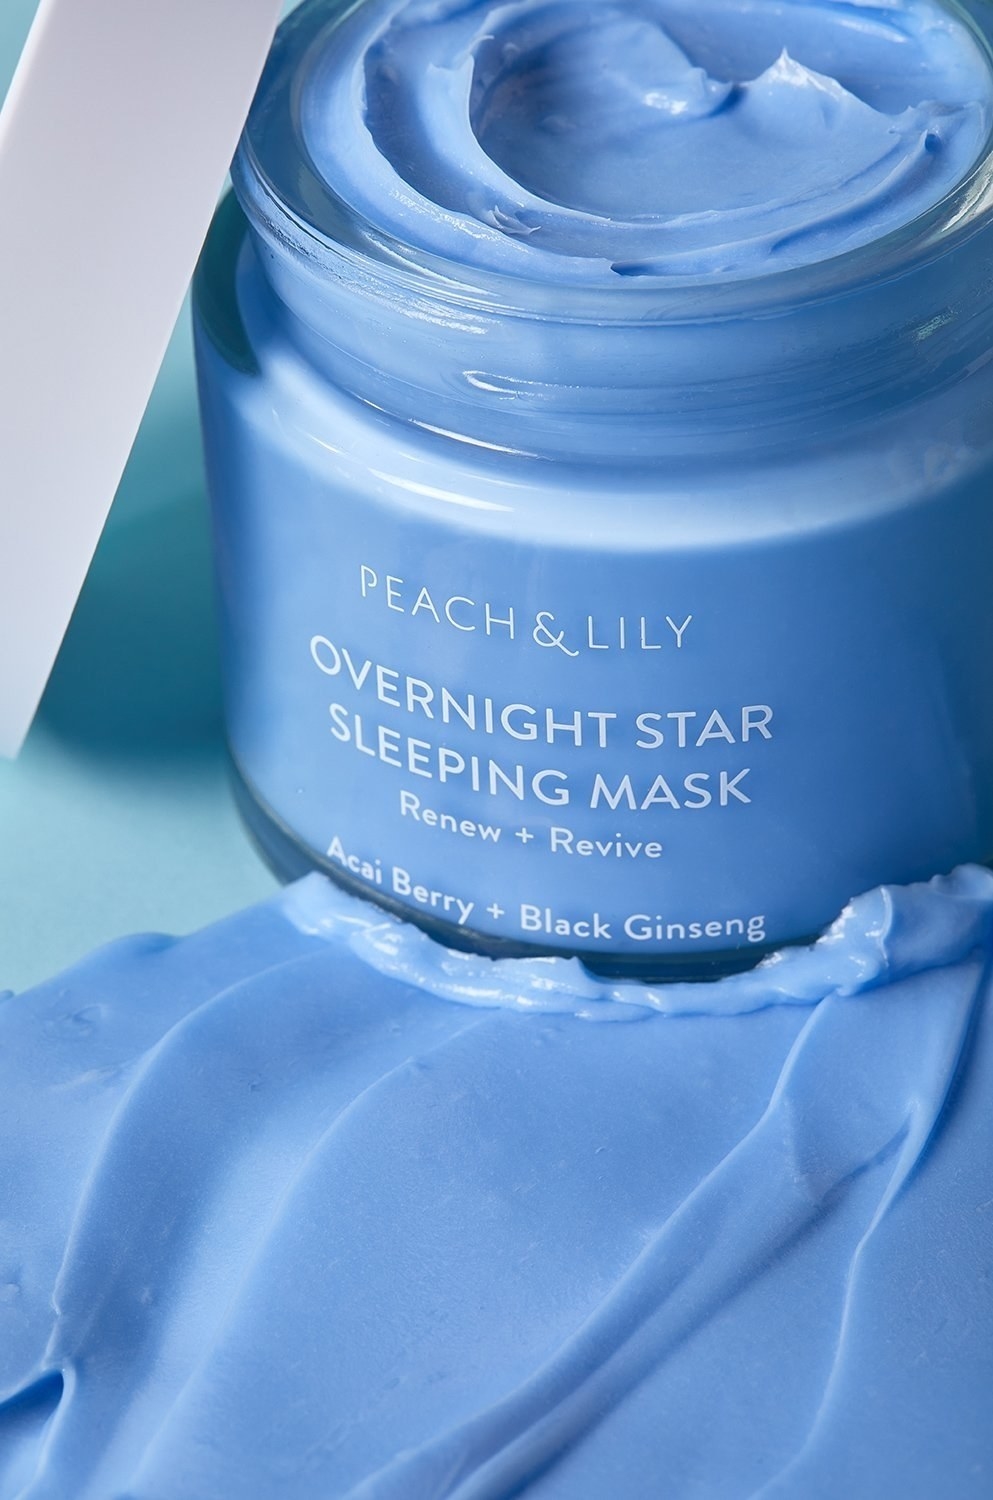 the blue bottle of night cream showing how rich and silky it is